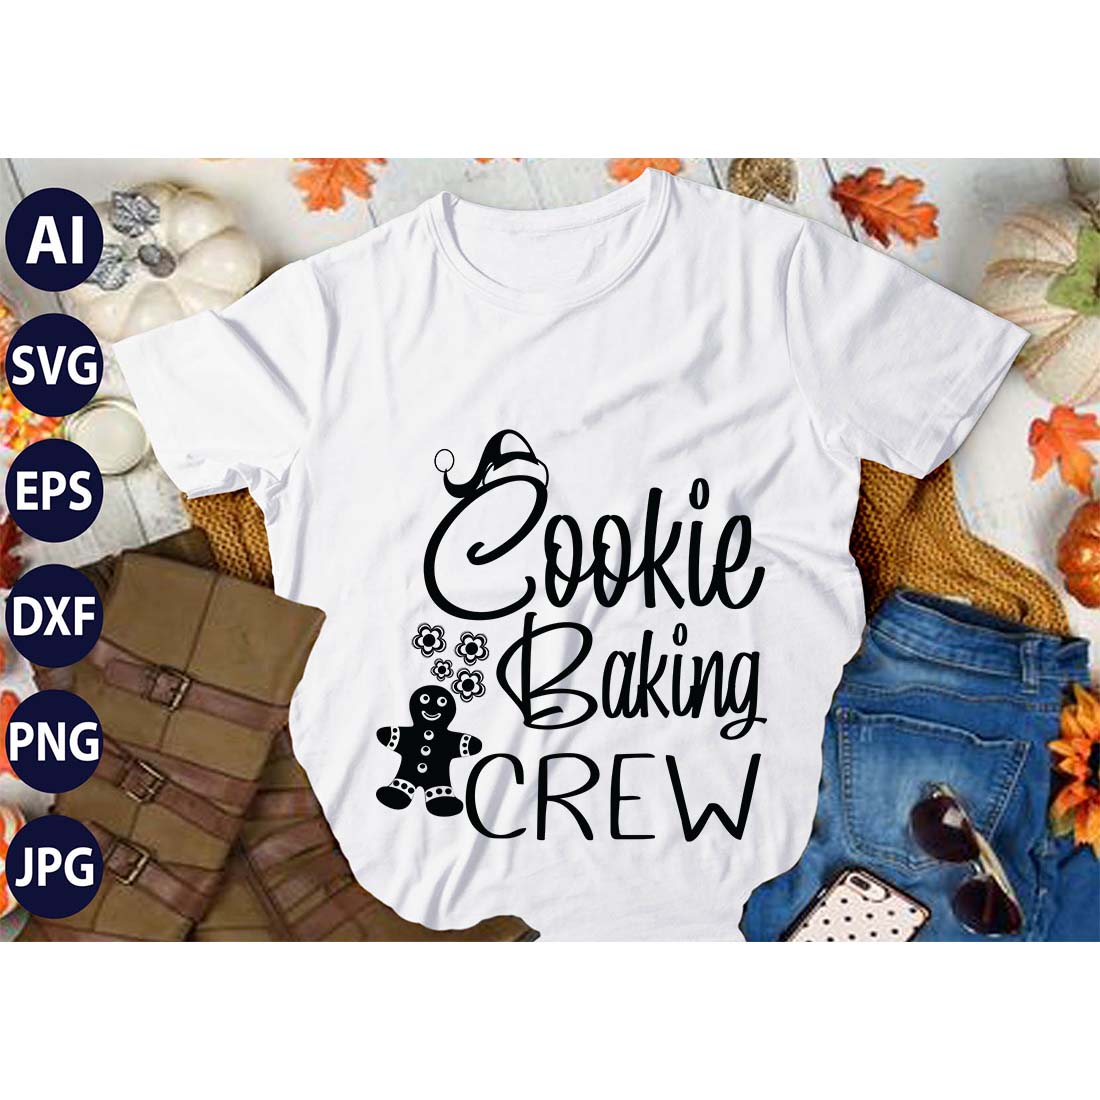 Cookie Baking Crew, SVG T-Shirt Design |Christmas Retro It's All About Jesus Typography Tshirt Design | Ai, Svg, Eps, Dxf, Jpeg, Png, Instant download T-Shirt | 100% print-ready Digital vector file preview image.